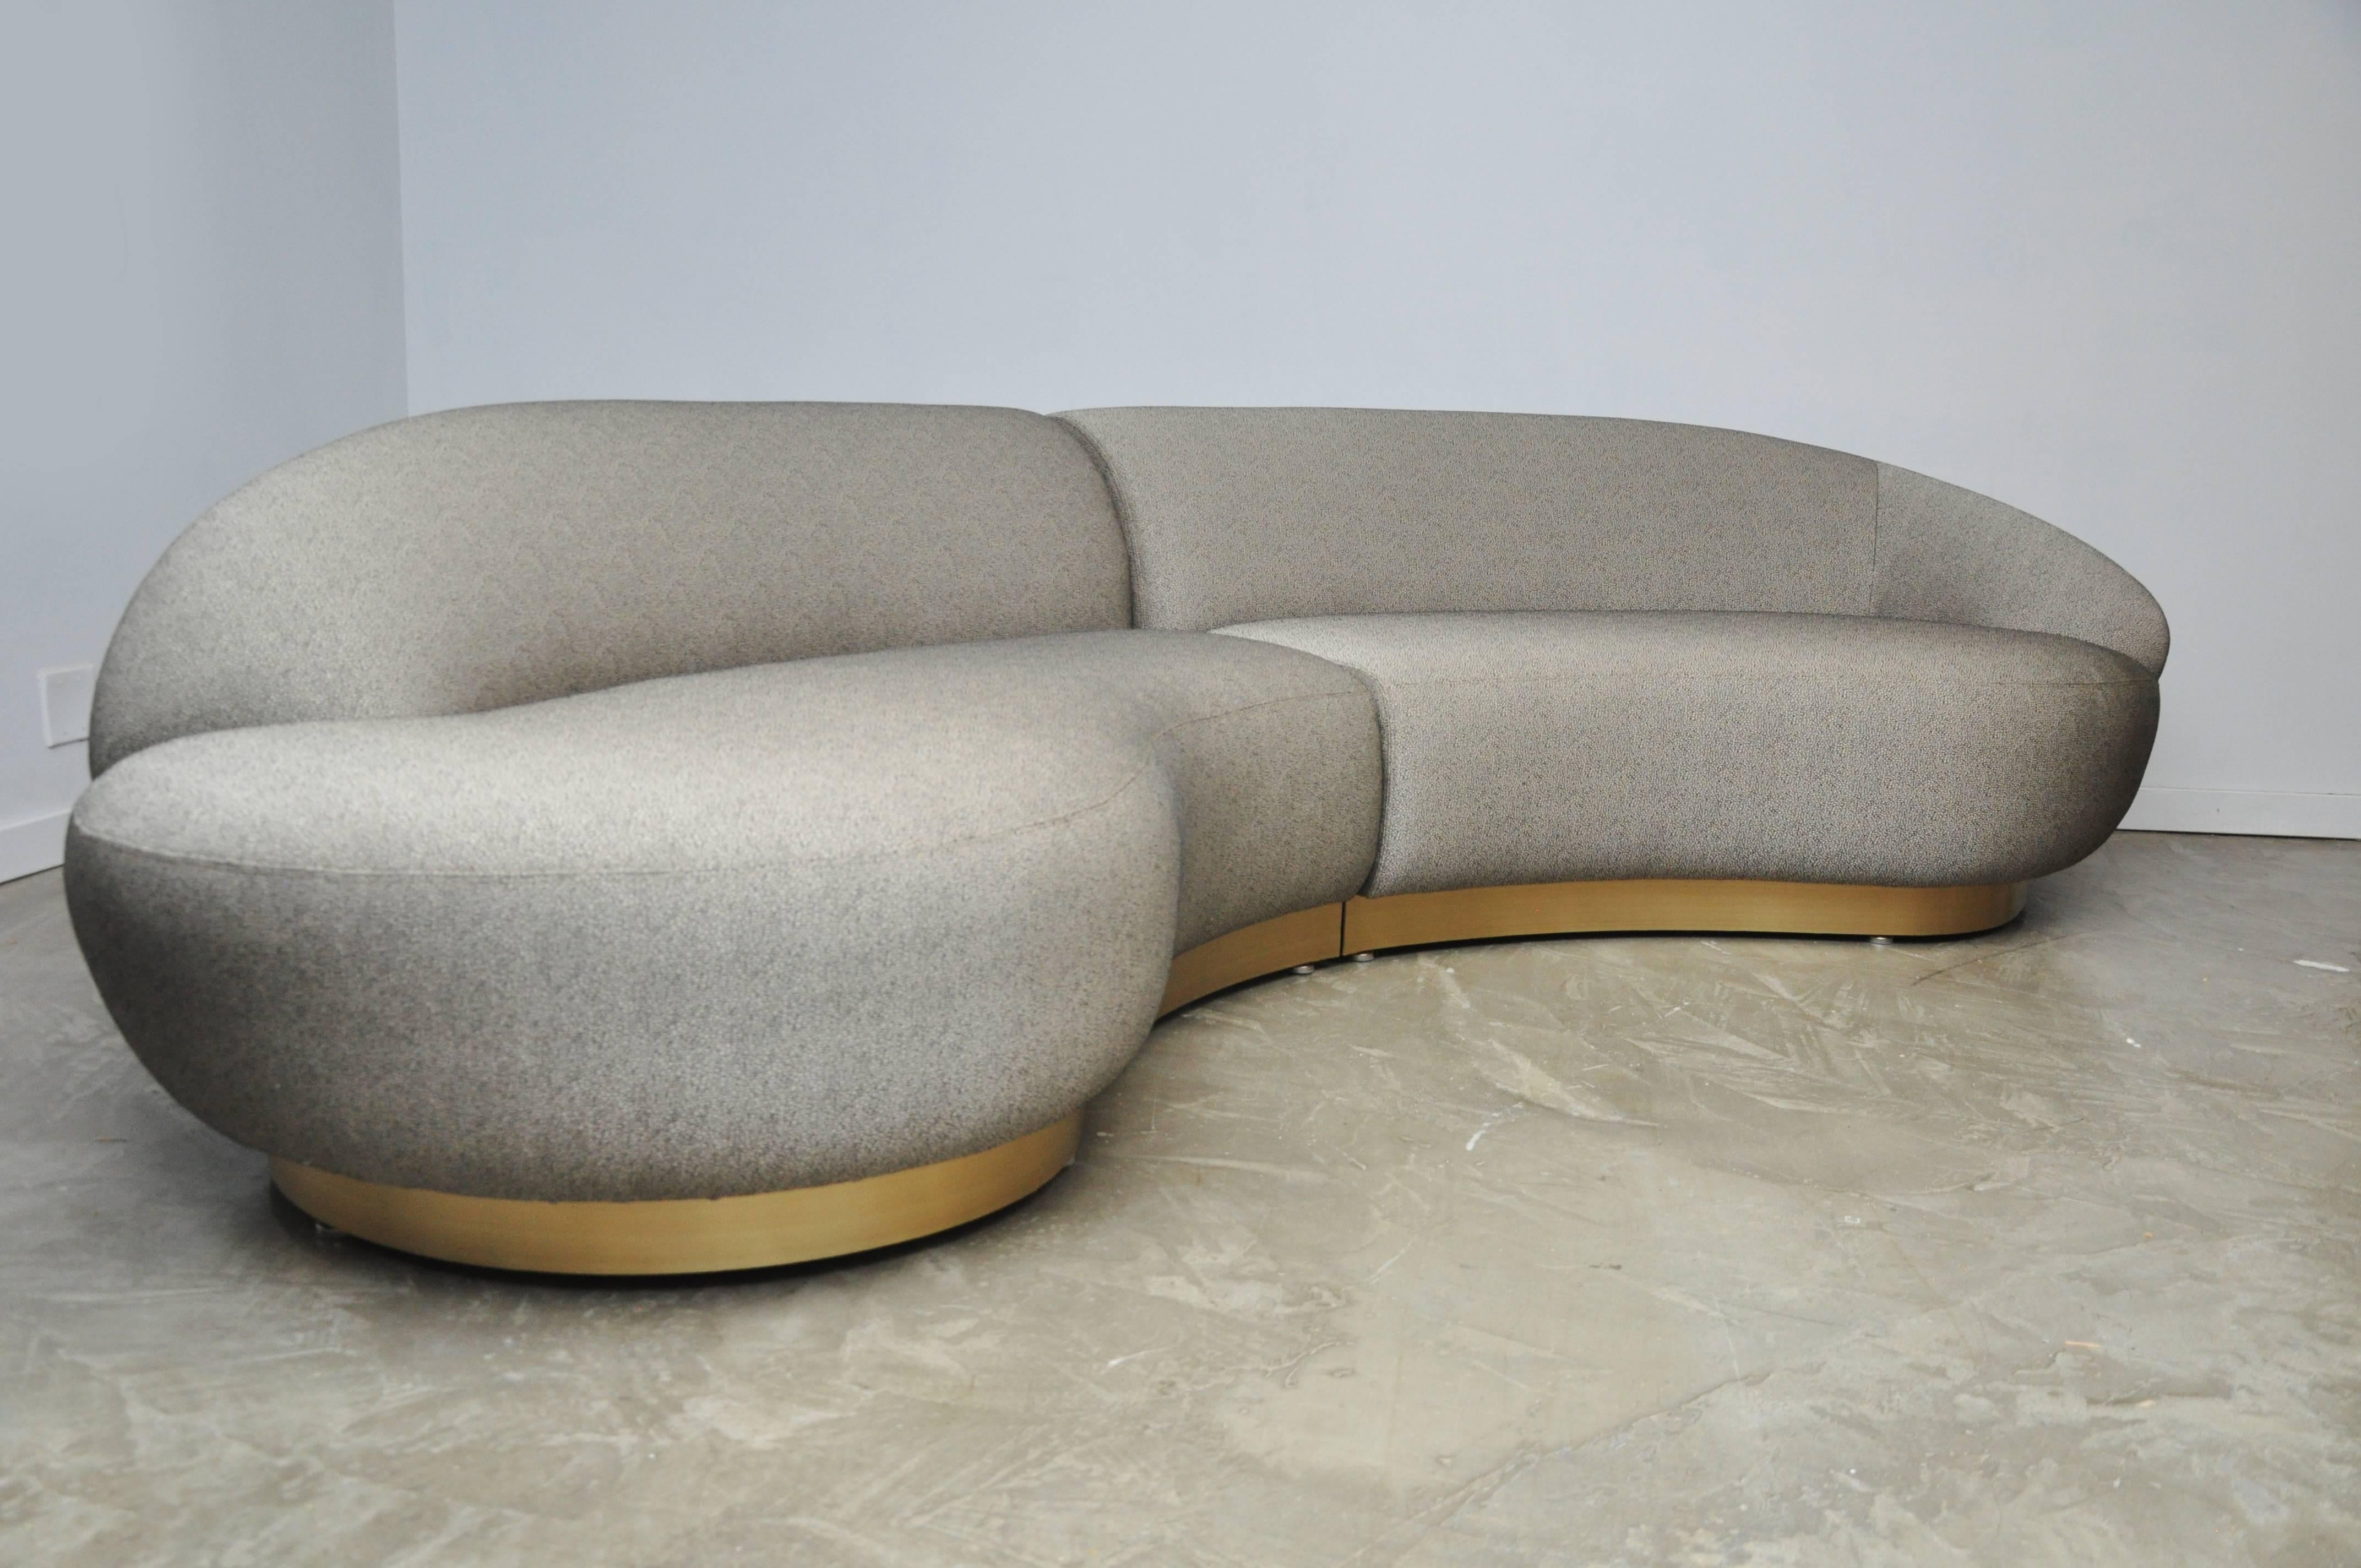 Two-piece sectional by Milo Baughman for Thayer-Coggin. Fully restored. New gold or black woven upholster by Great Plaines over brushed bronze base.